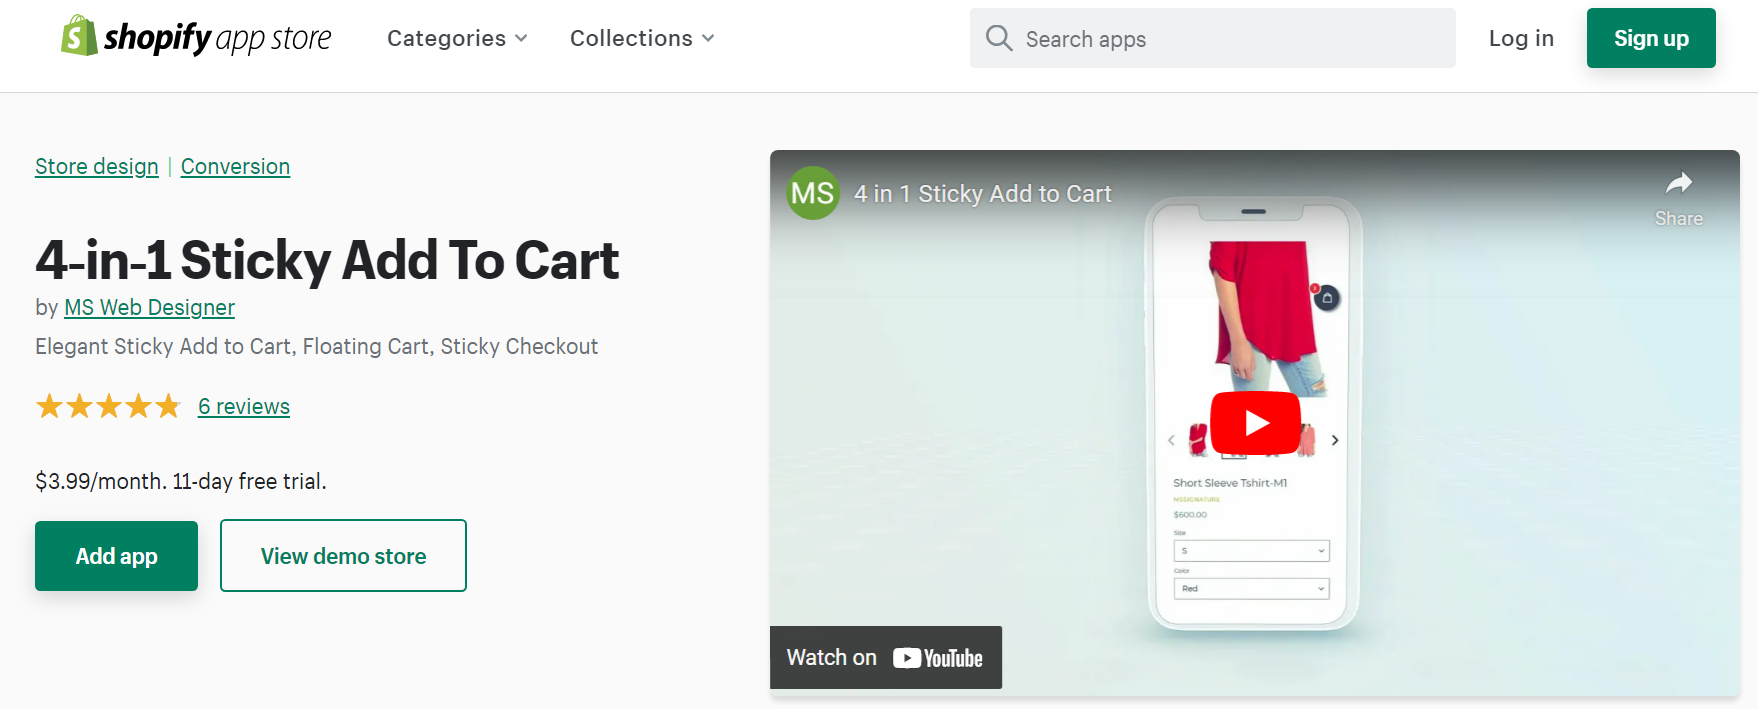 4‑in‑1 Sticky Add To Cart by MS Web Designer